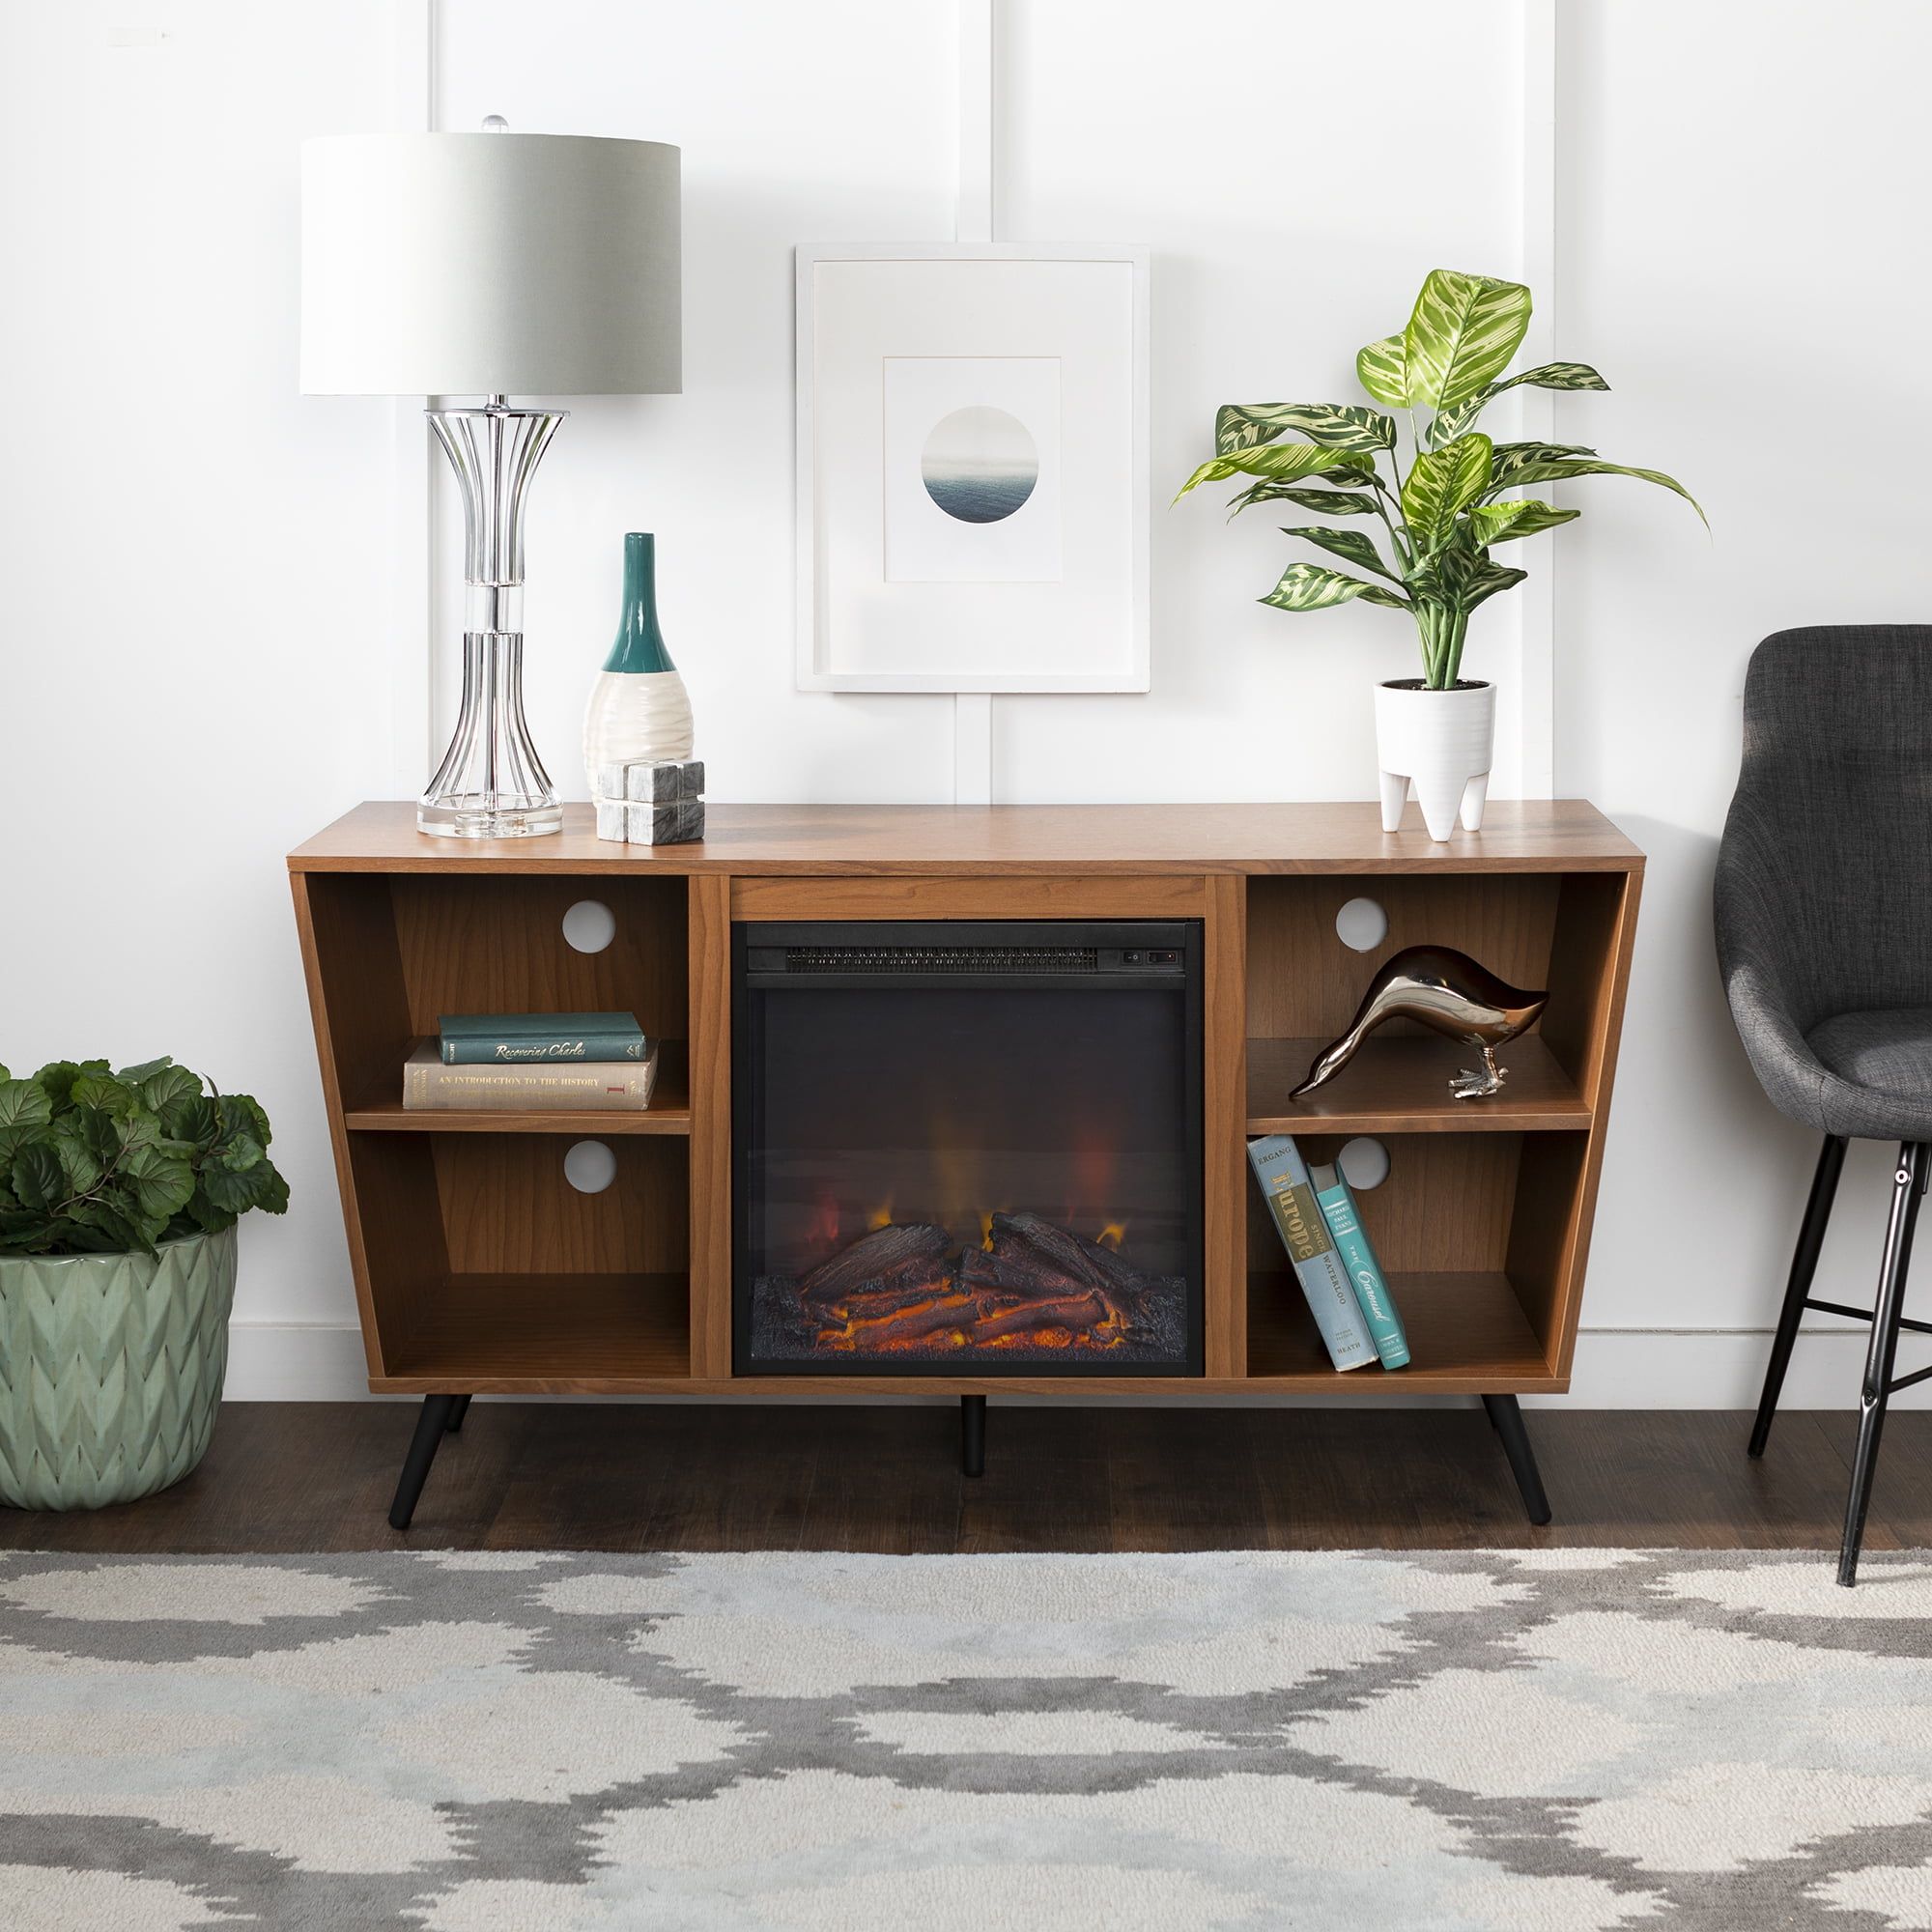 Manor Park 52" Mid Century Modern Angled Side Fireplace Tv Stand Regarding Modern Fireplace Tv Stands (View 13 of 20)